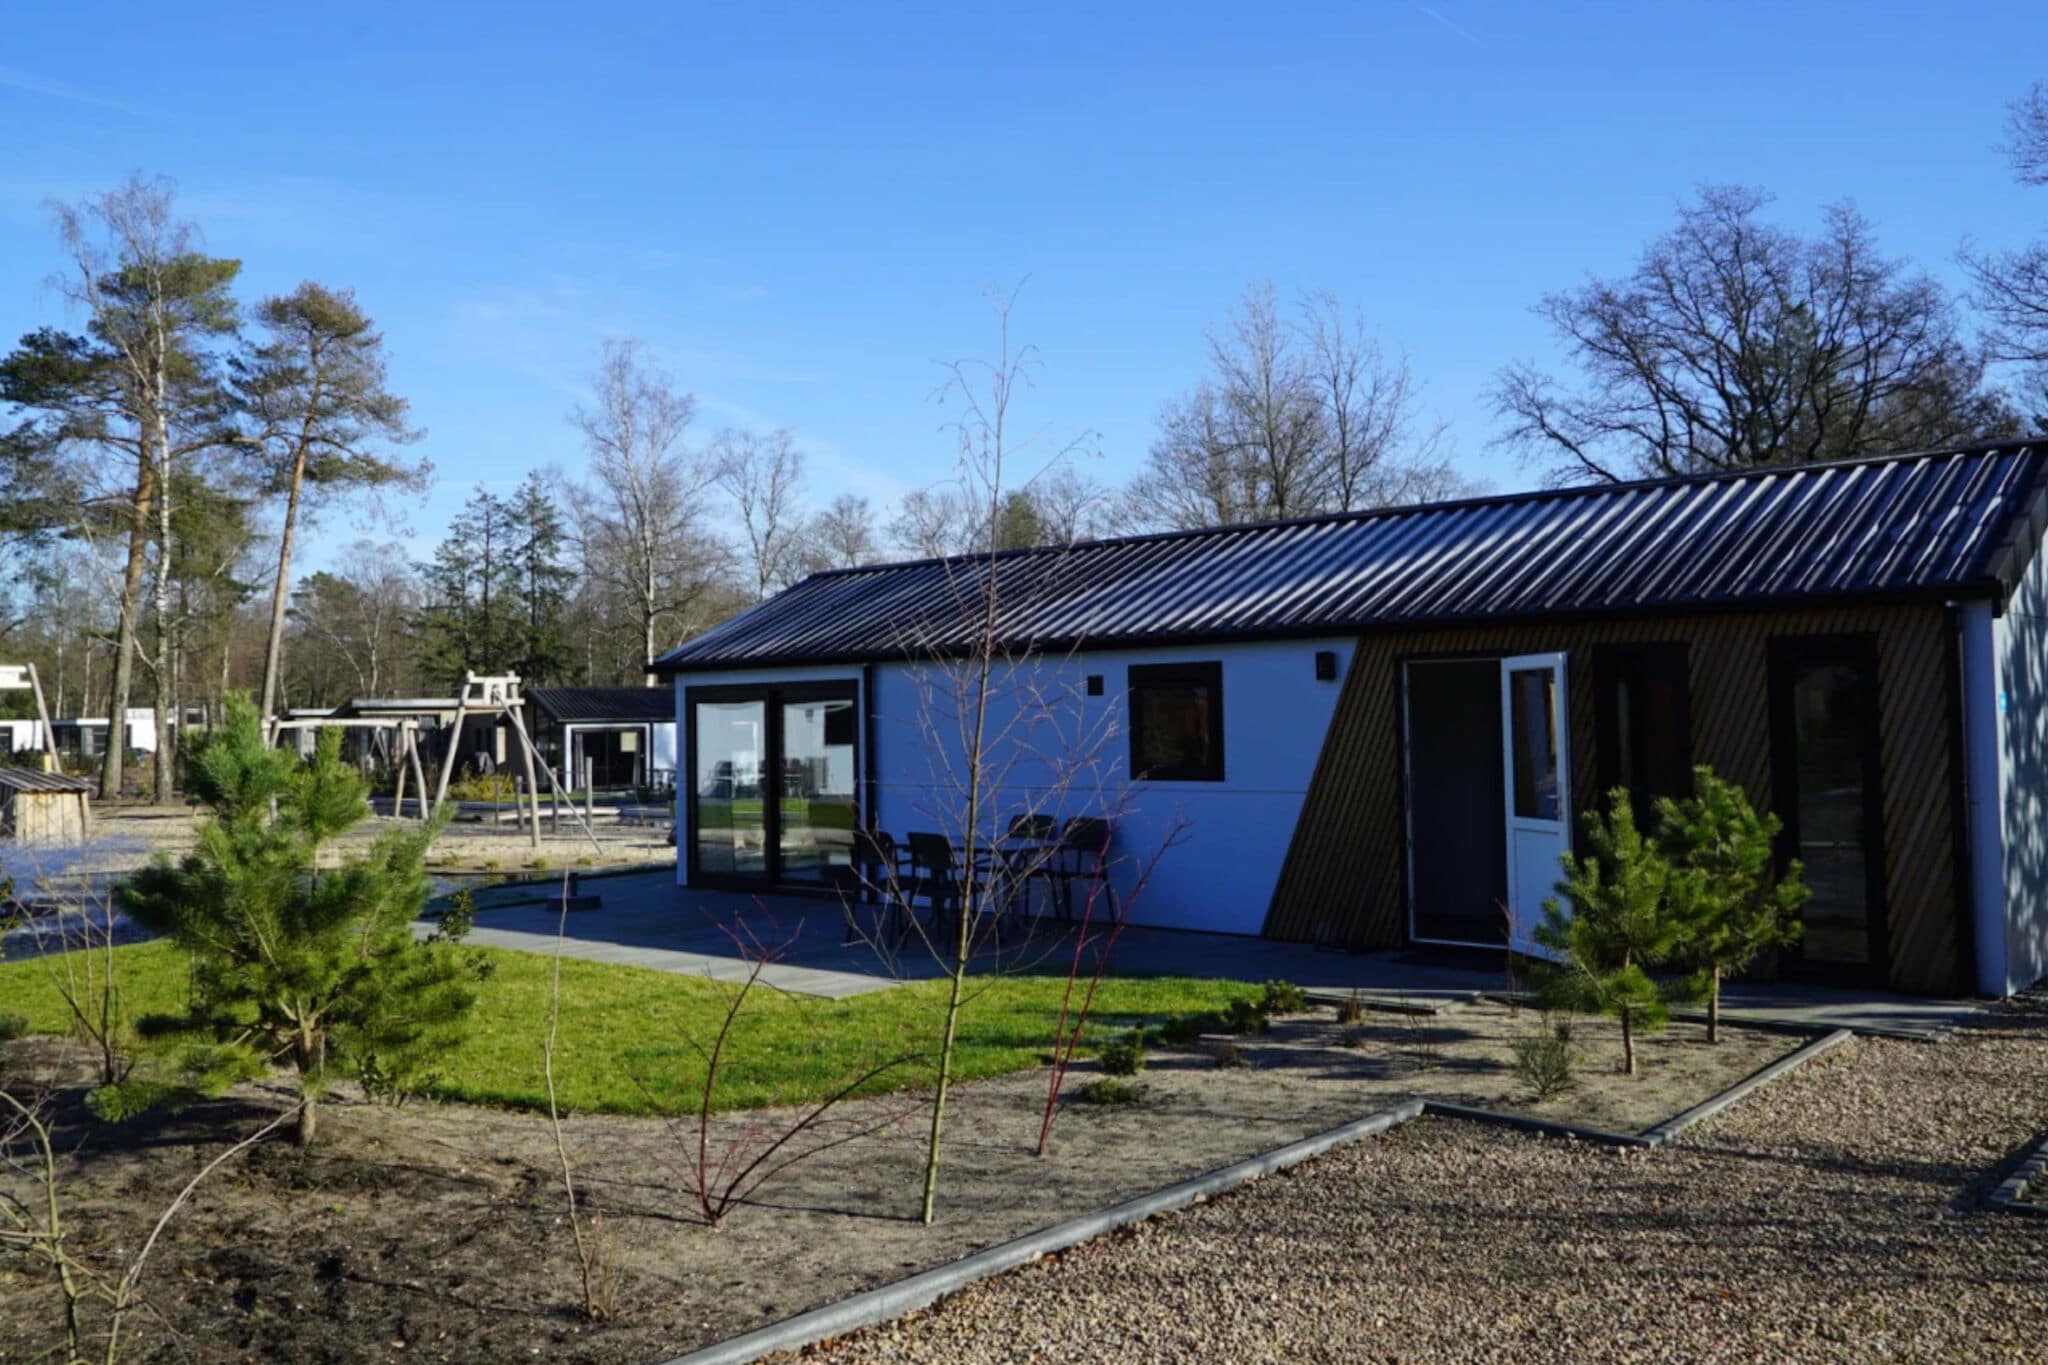 Nice chalet in a holiday park, adjacent to the Hoge Veluwe National Park